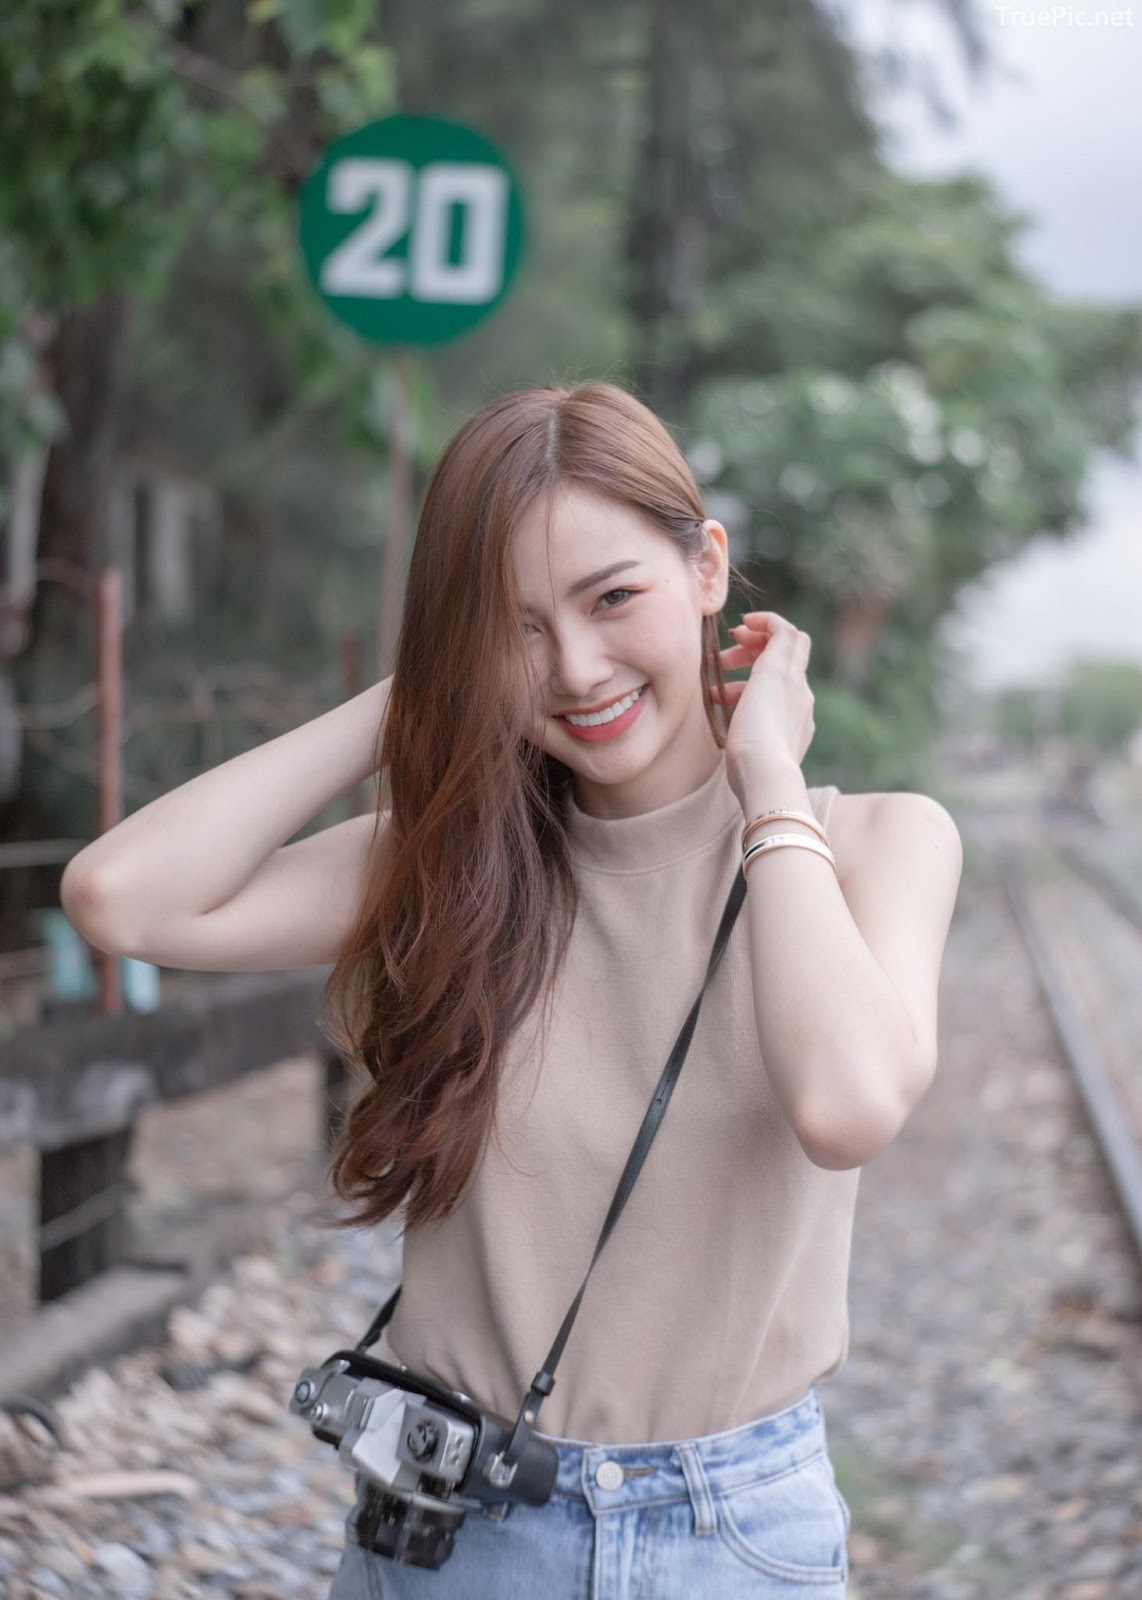 Thailand beautiful model - Pla Kewalin Udomaksorn - A beautiful morning with a cute girl - Picture 80